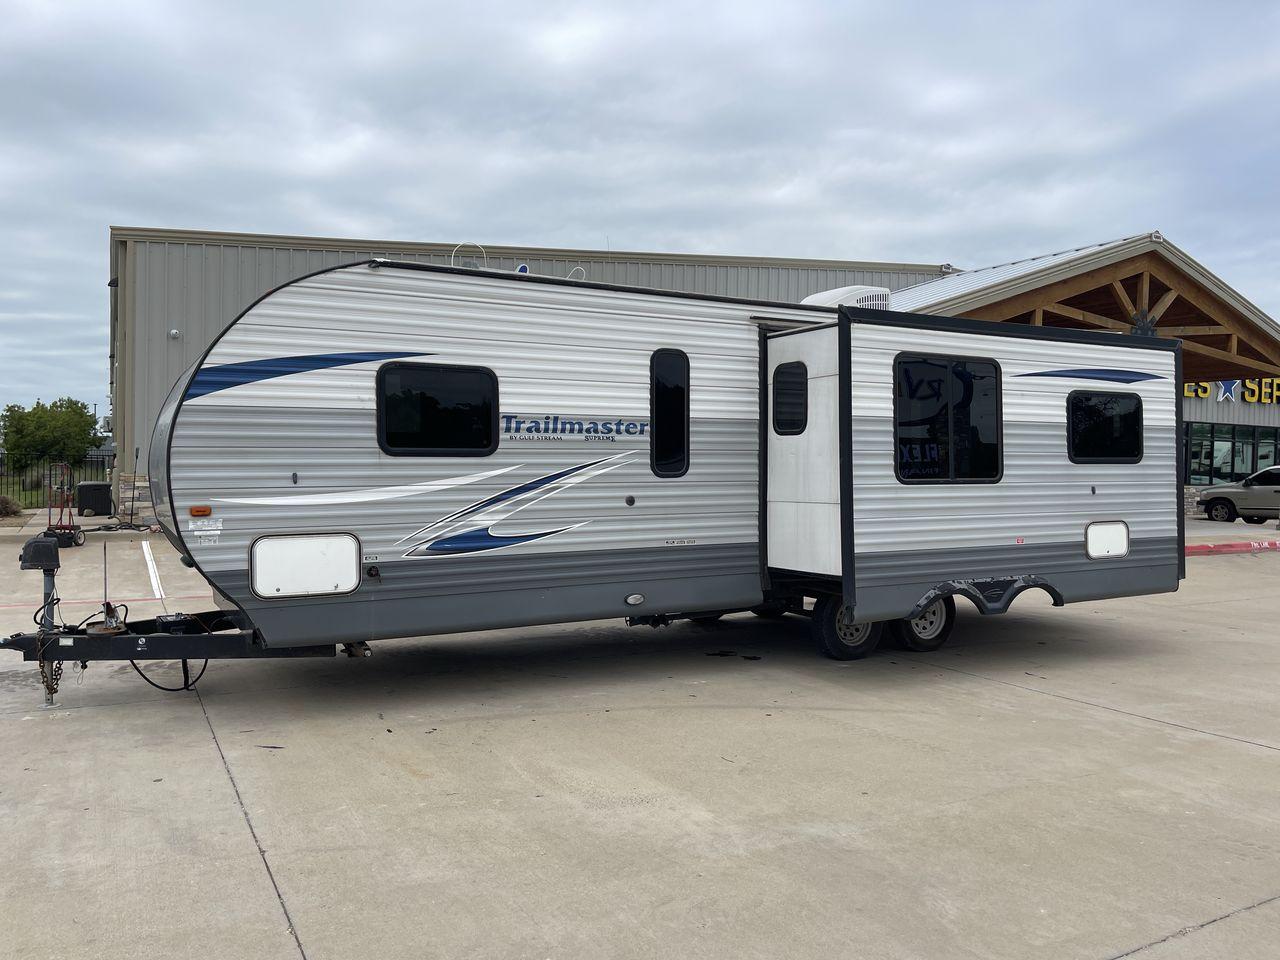 2018 GULFSTREAM TRAILMASTER 262RLS (1NL1GTP2XJ1) , Length: 31.25 ft. | Dry Weight: 6,849 lbs. | Slides: 1 transmission, located at 4319 N Main Street, Cleburne, TX, 76033, (817) 221-0660, 32.435829, -97.384178 - This 2018 Gulf Stream Trailmaster 262RLS travel trailer measures just over 31' in length. It is a dual axle, steel wheel setup with a dry weight of 6,849 lbs and a carrying capacity of 1,421 lbs. With a dry weight of 6,849 lbs., the Trailmaster 262RLS offers easy maneuverability without compromising - Photo #21